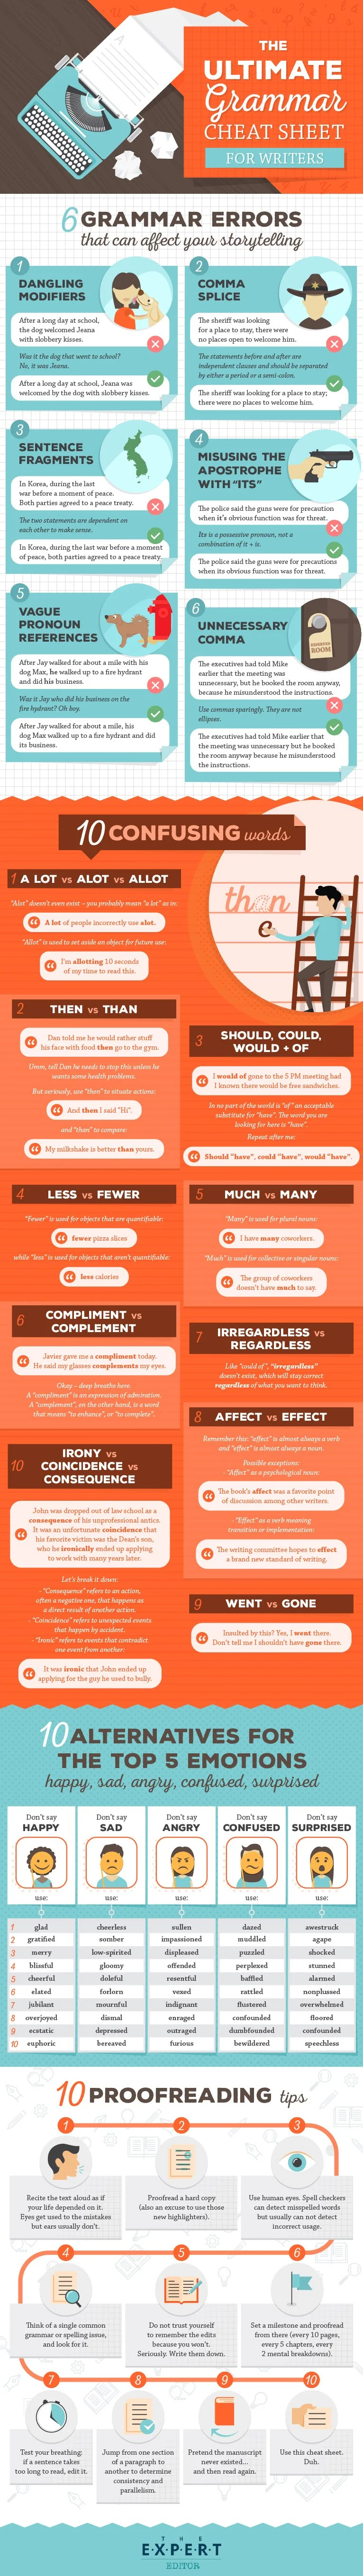 The Ultimate Grammar Cheat Sheet for Writers - #Infographic